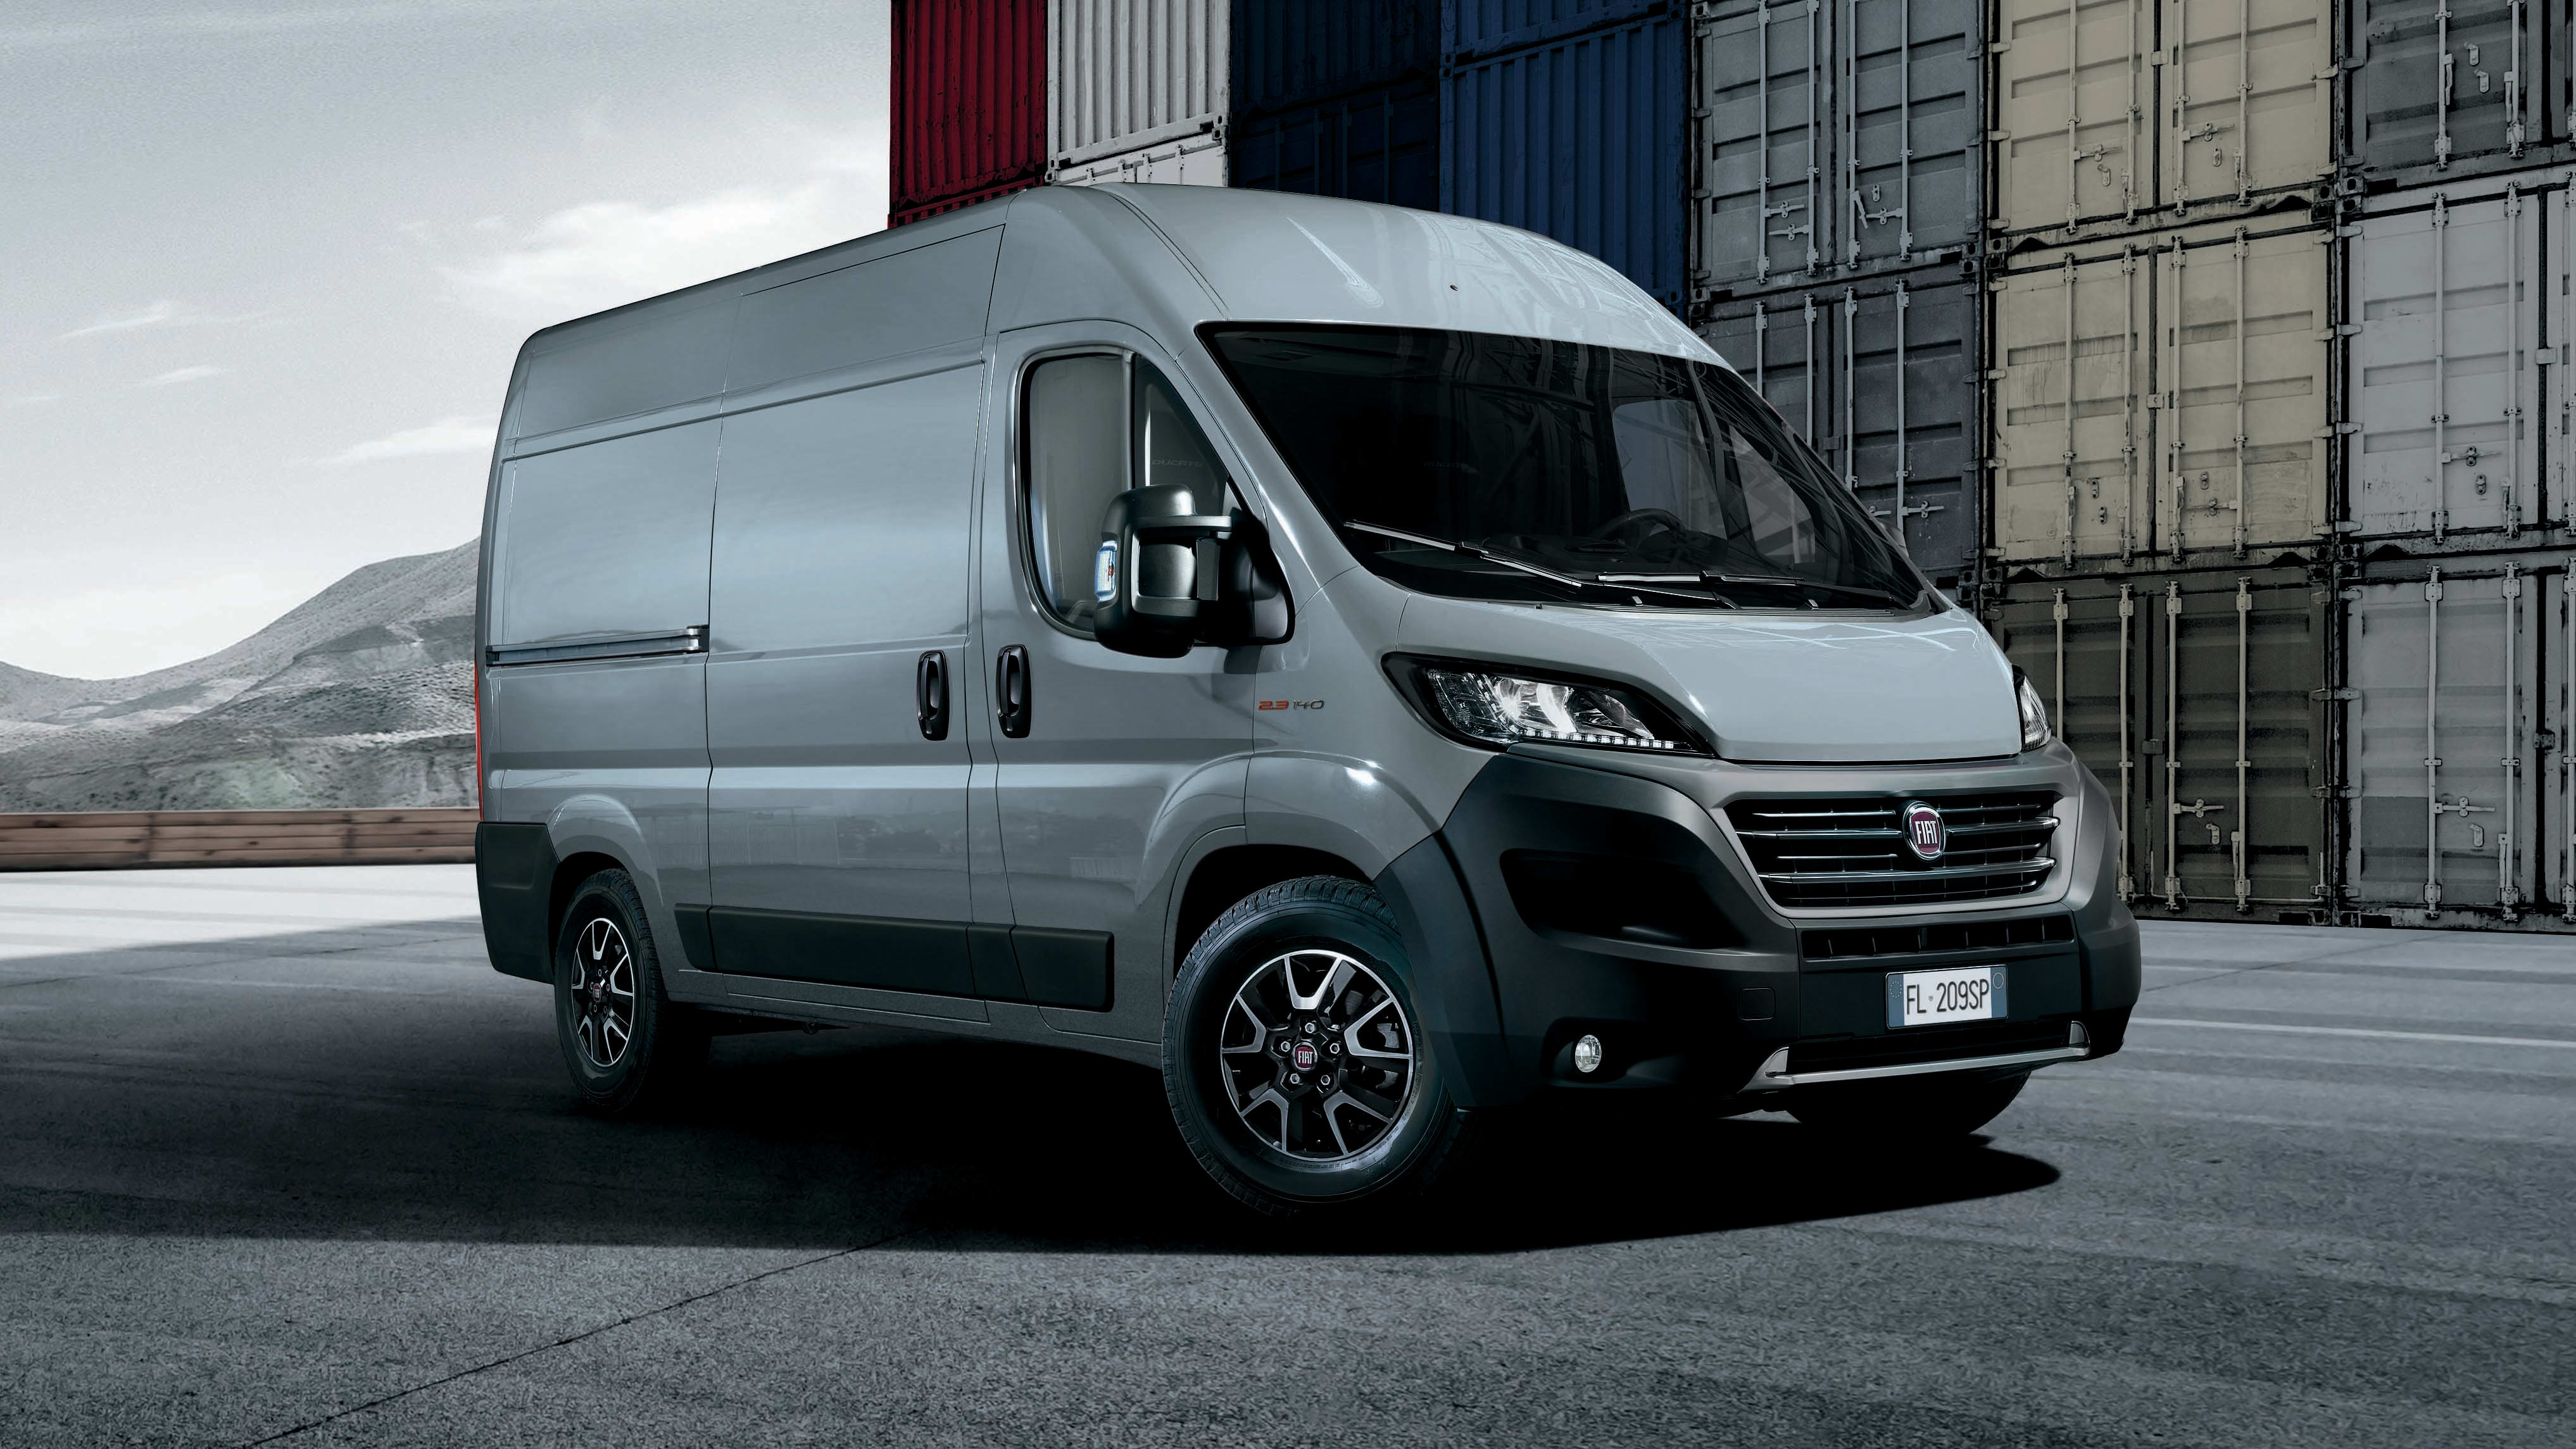 2020 Fiat Ducato price and specs: New engine and transmission for Fiat's  large van | CarAdvice